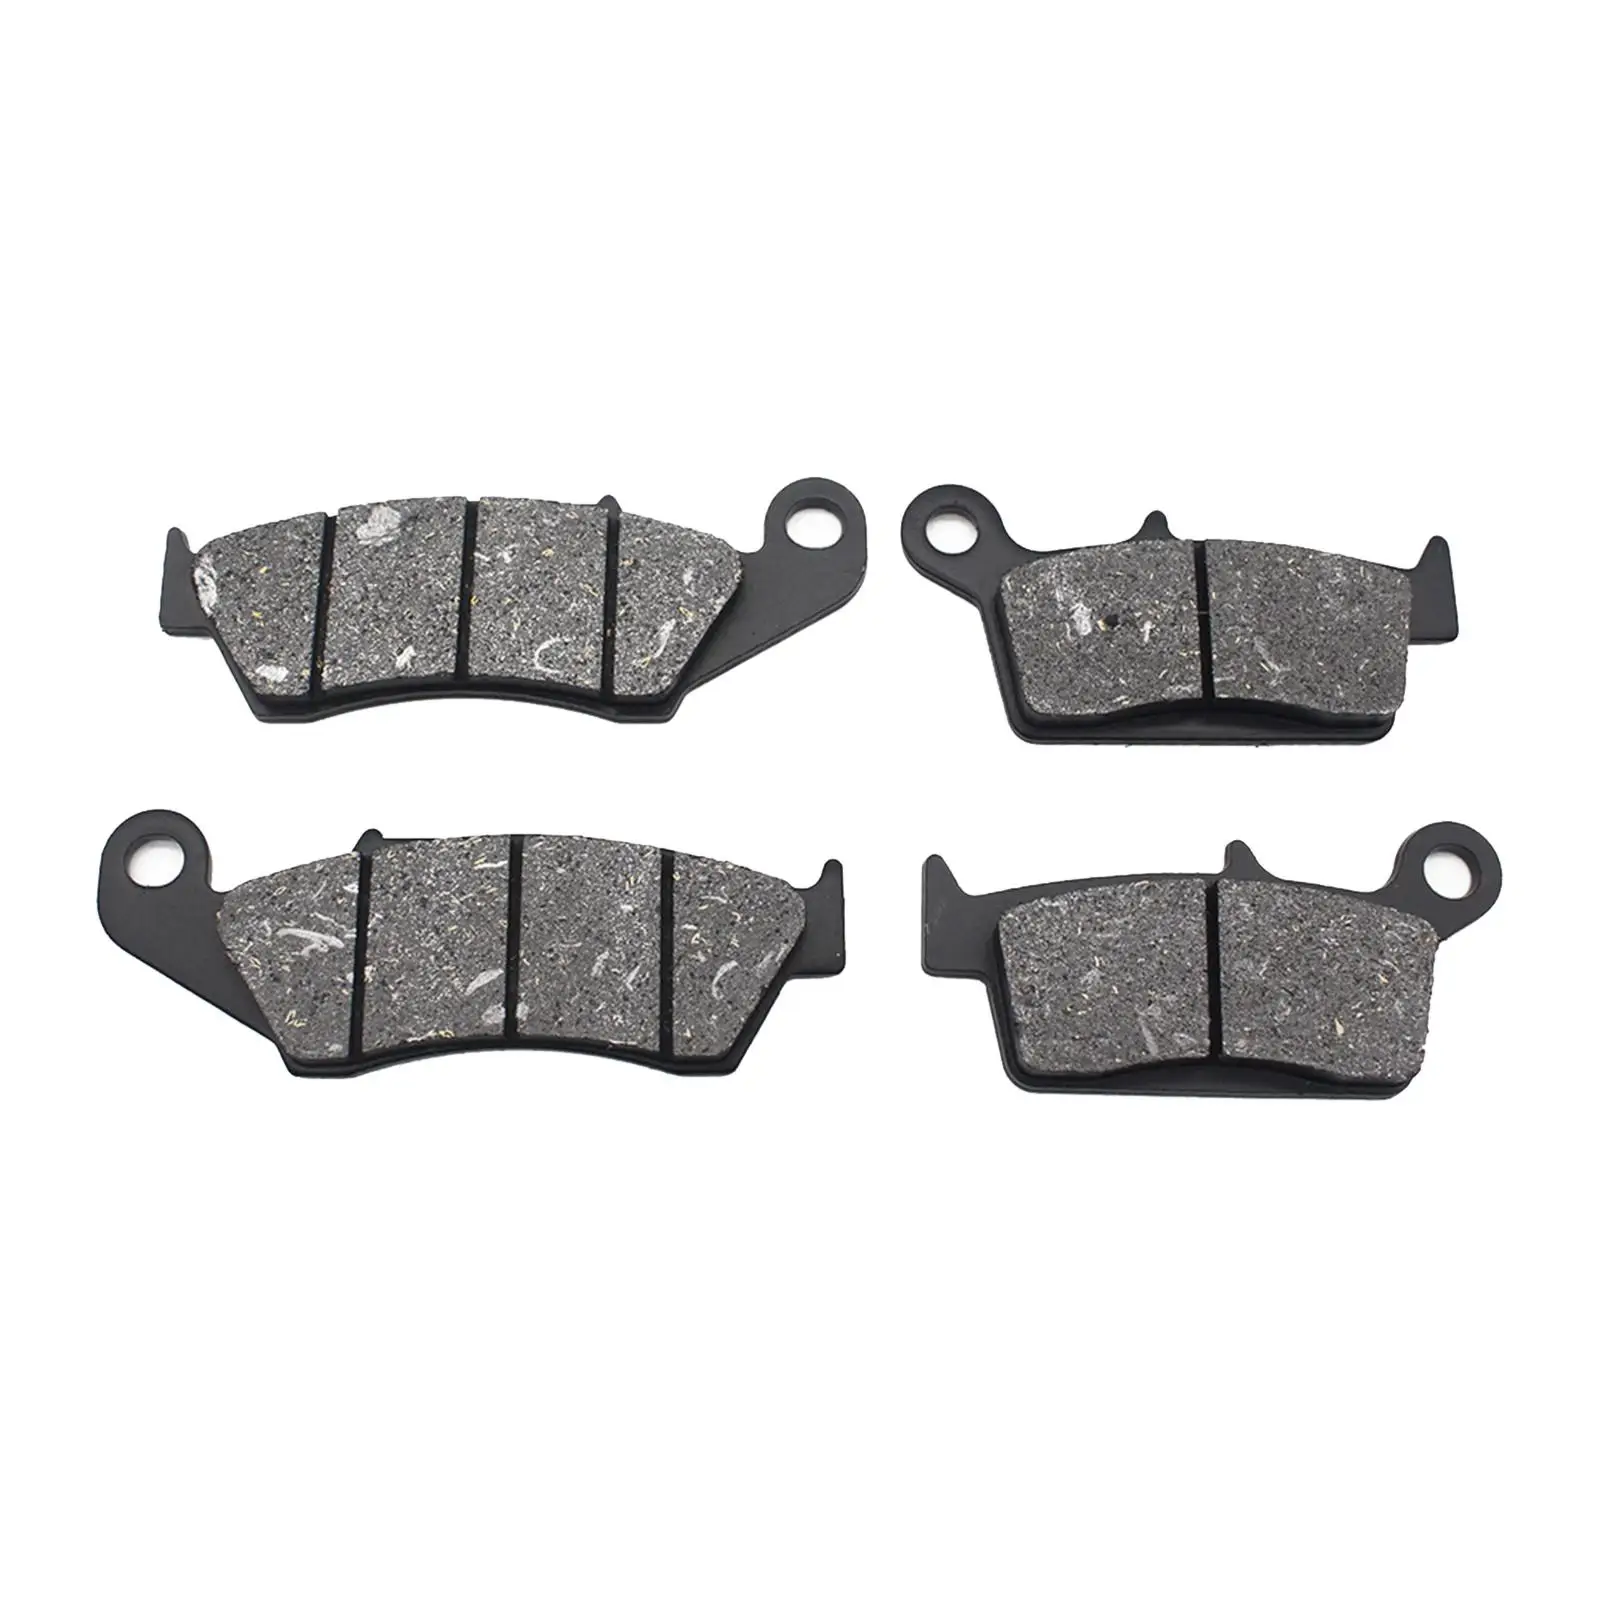 Brake Pad Front / Rear Fits for 00-07Smz07 RM125 2006-097